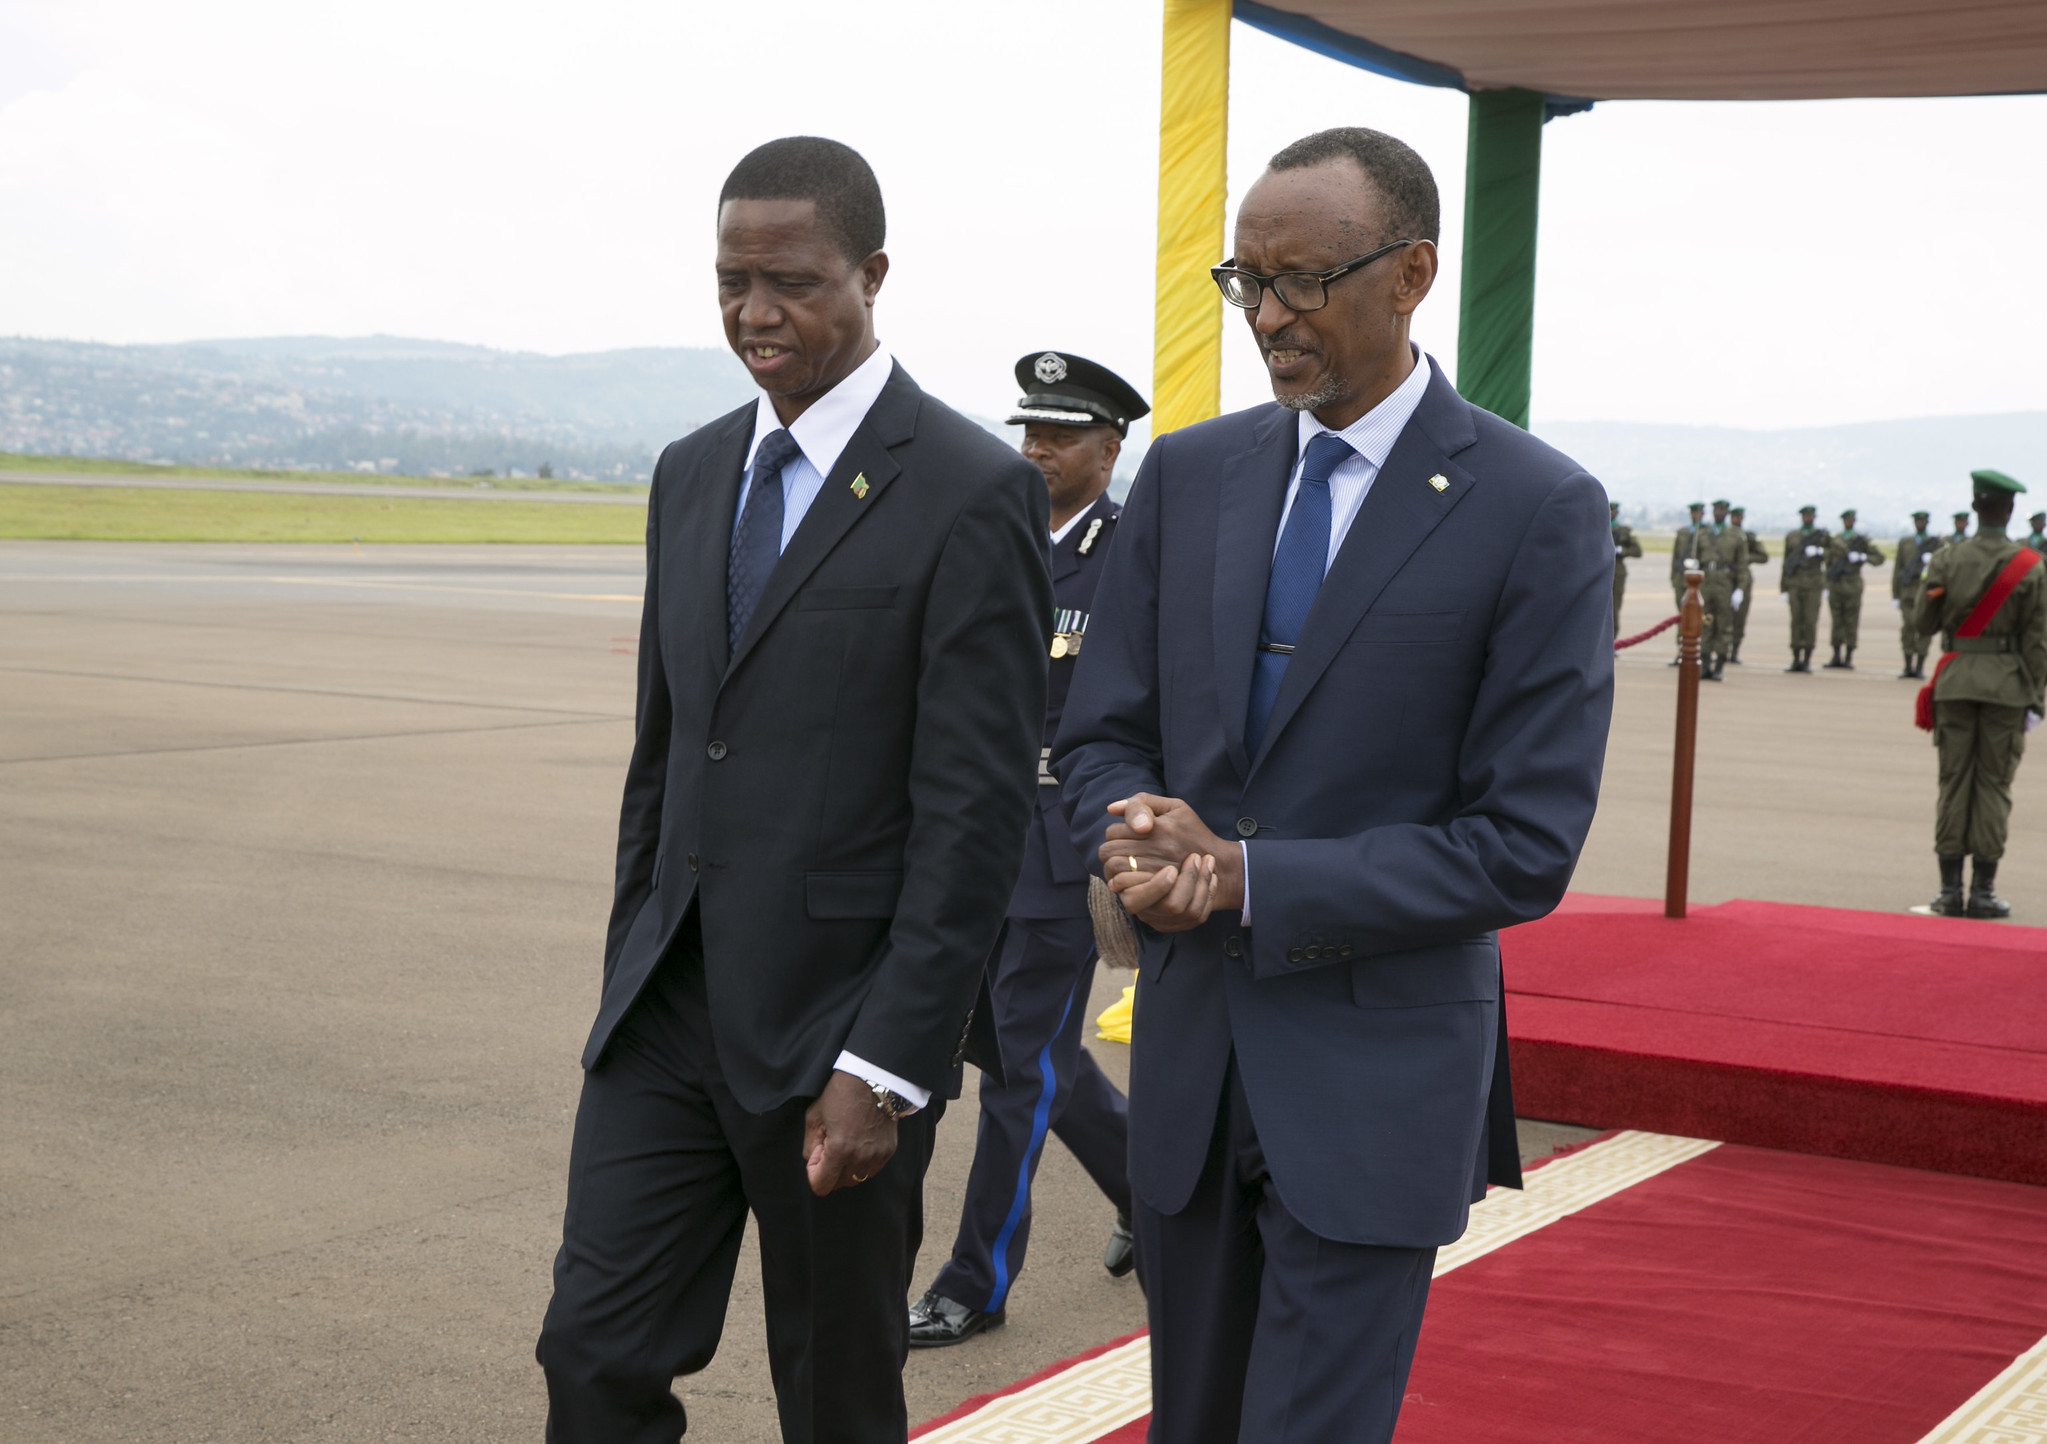 President Lungu (left) chatting with President Paul Kagame of Rwanda during his official visit to Rwanda in February 2018